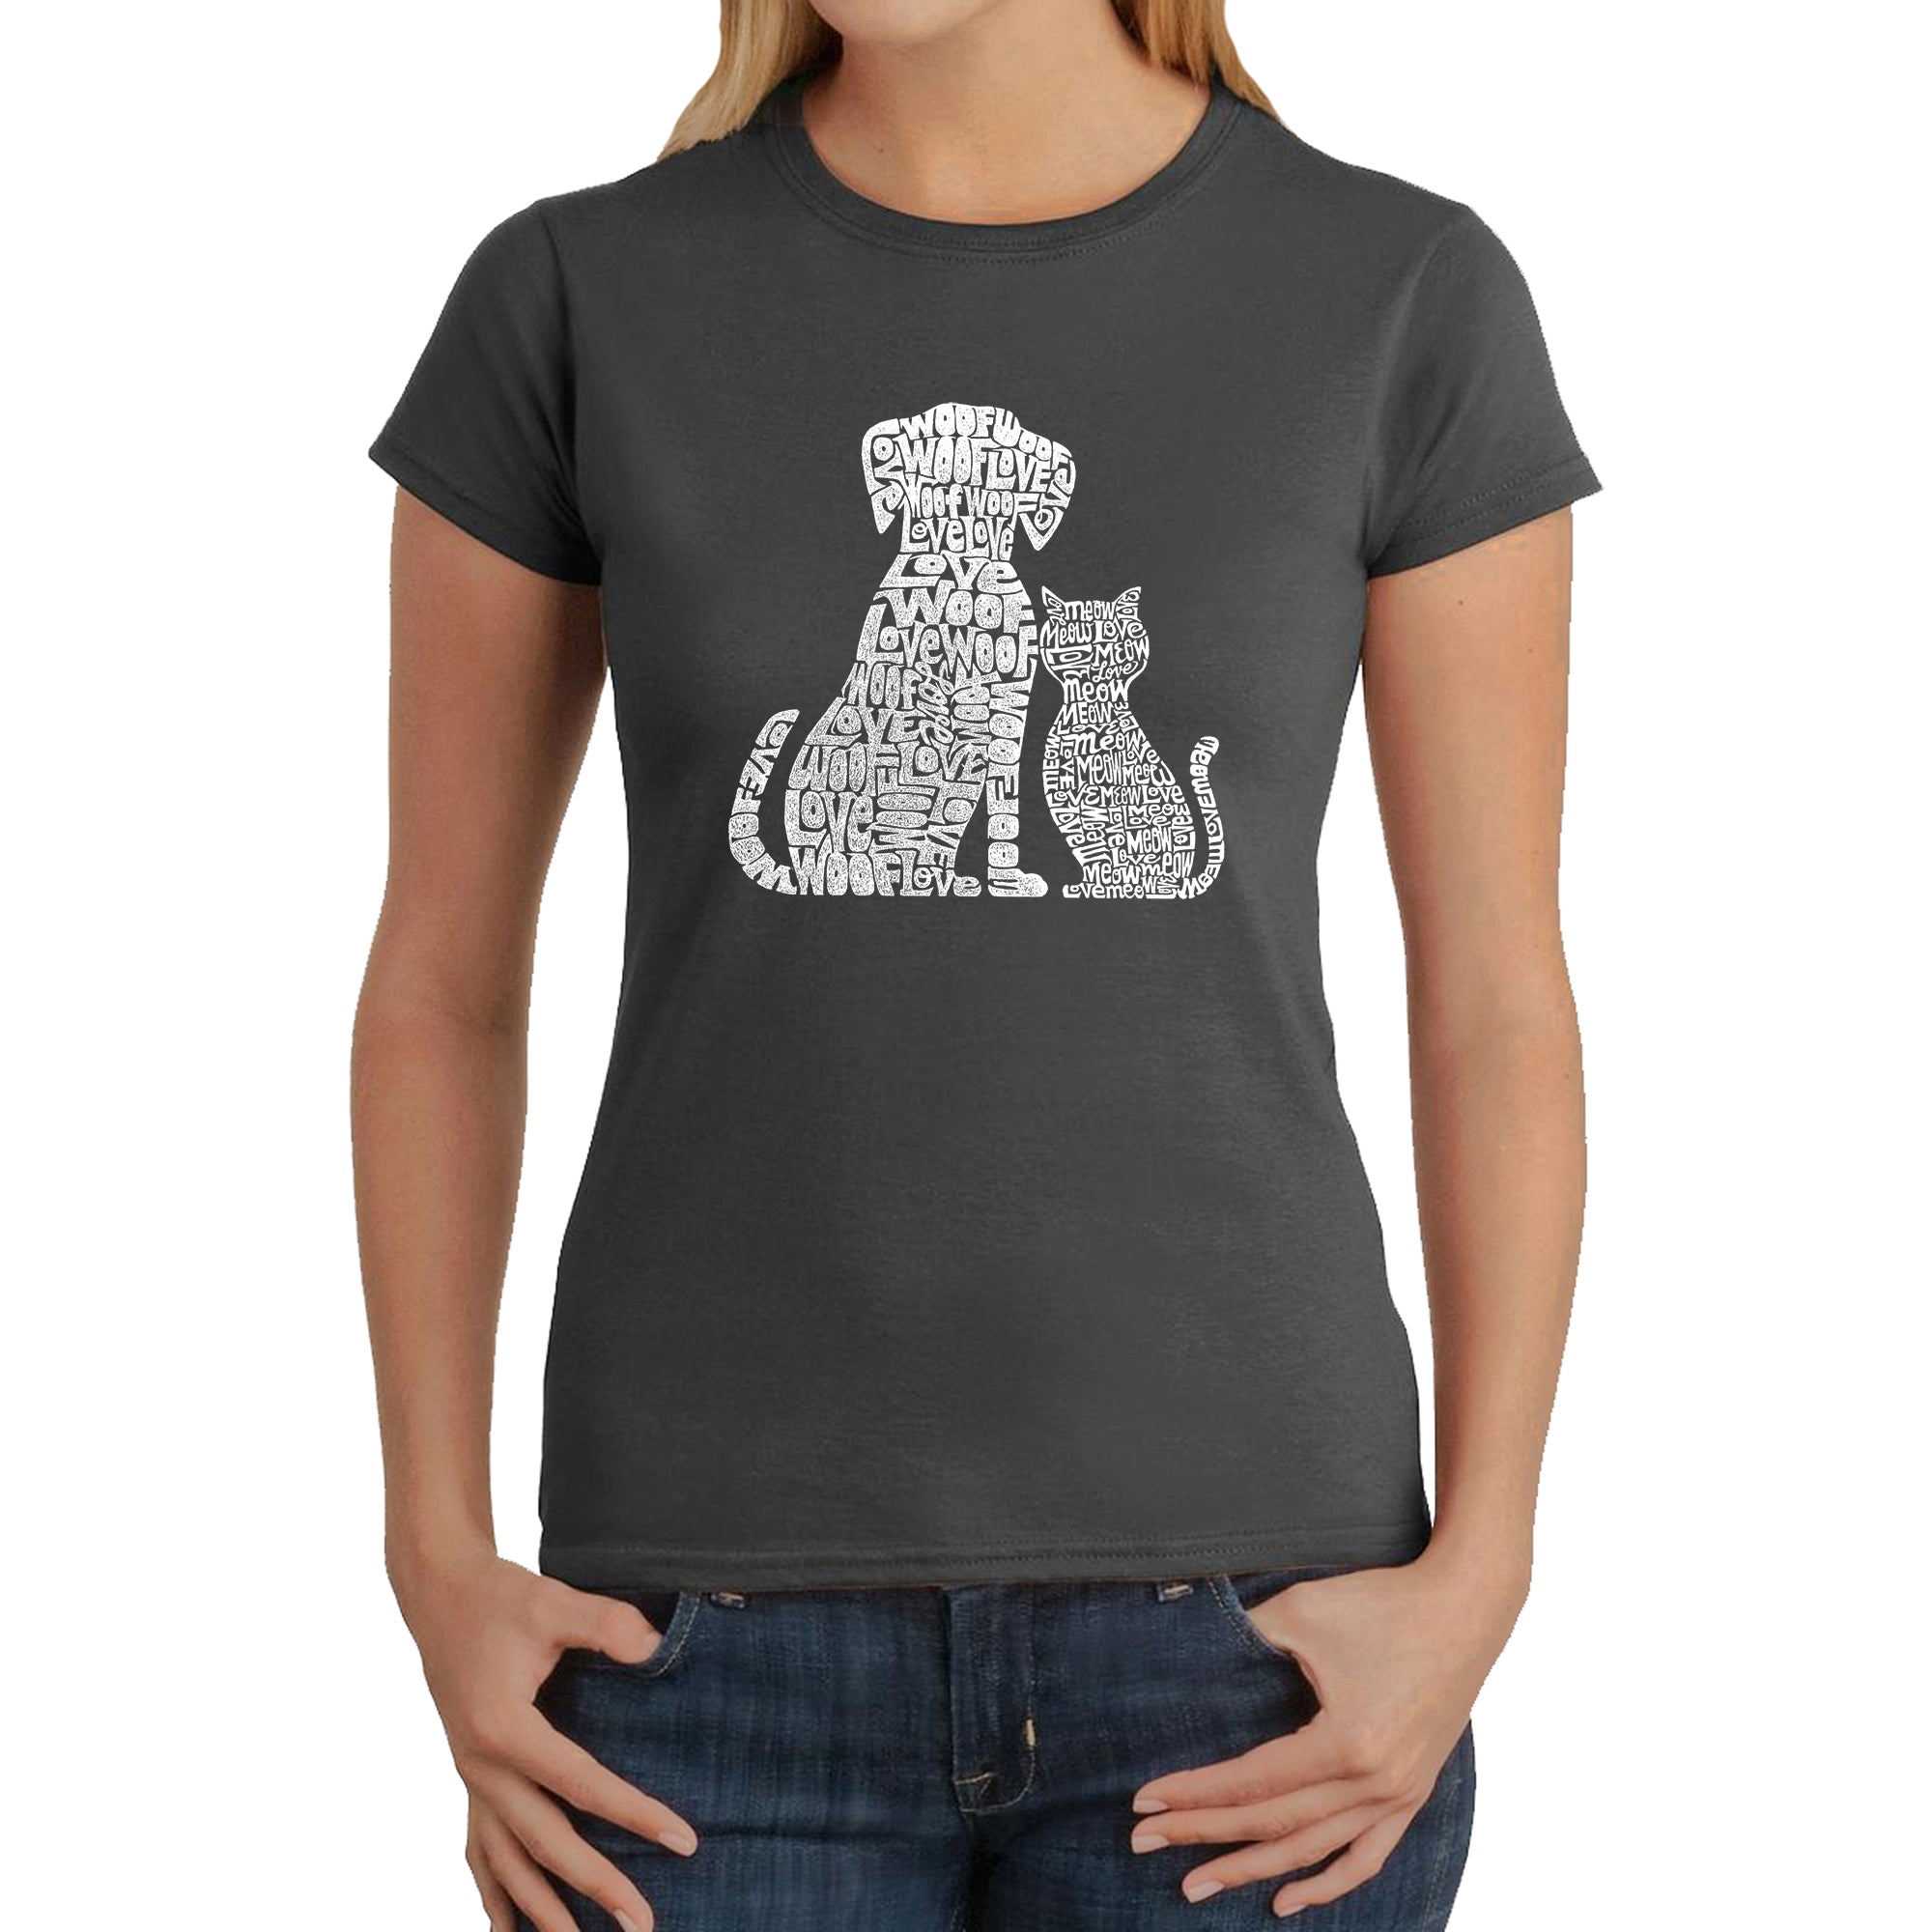 Dogs And Cats - Women's Word Art T-Shirt - Grey - XS